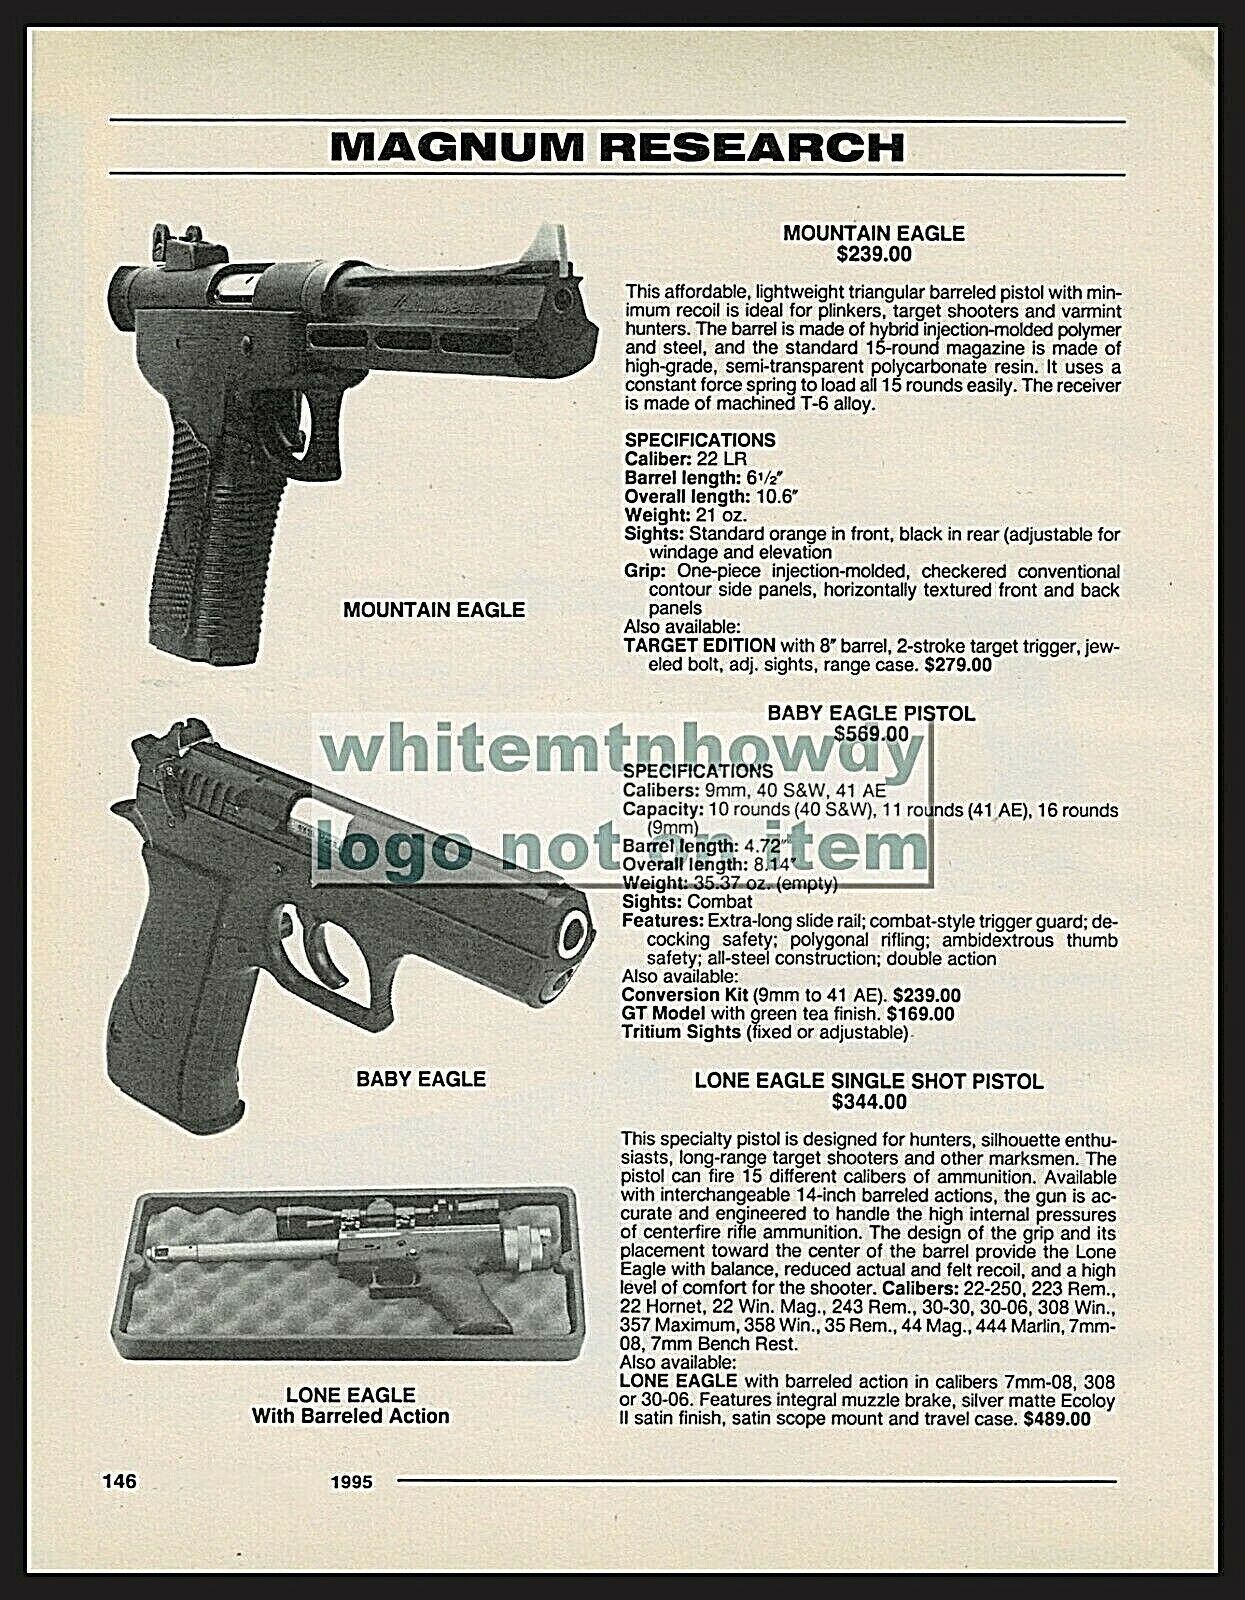 1995 MAGNUM RESEARCH Mountain, Baby & Lone Eagle Pistol PRINT AD w/ specs